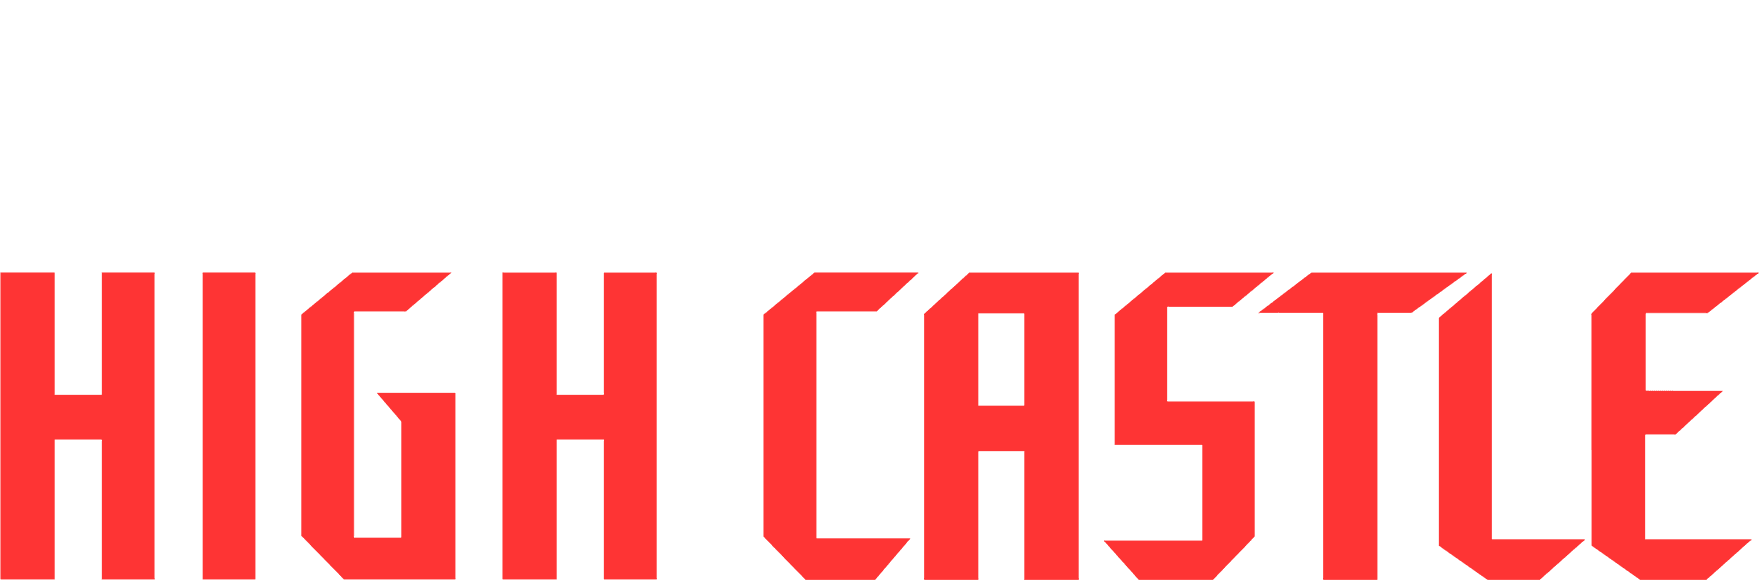 The Man in the High Castle logo